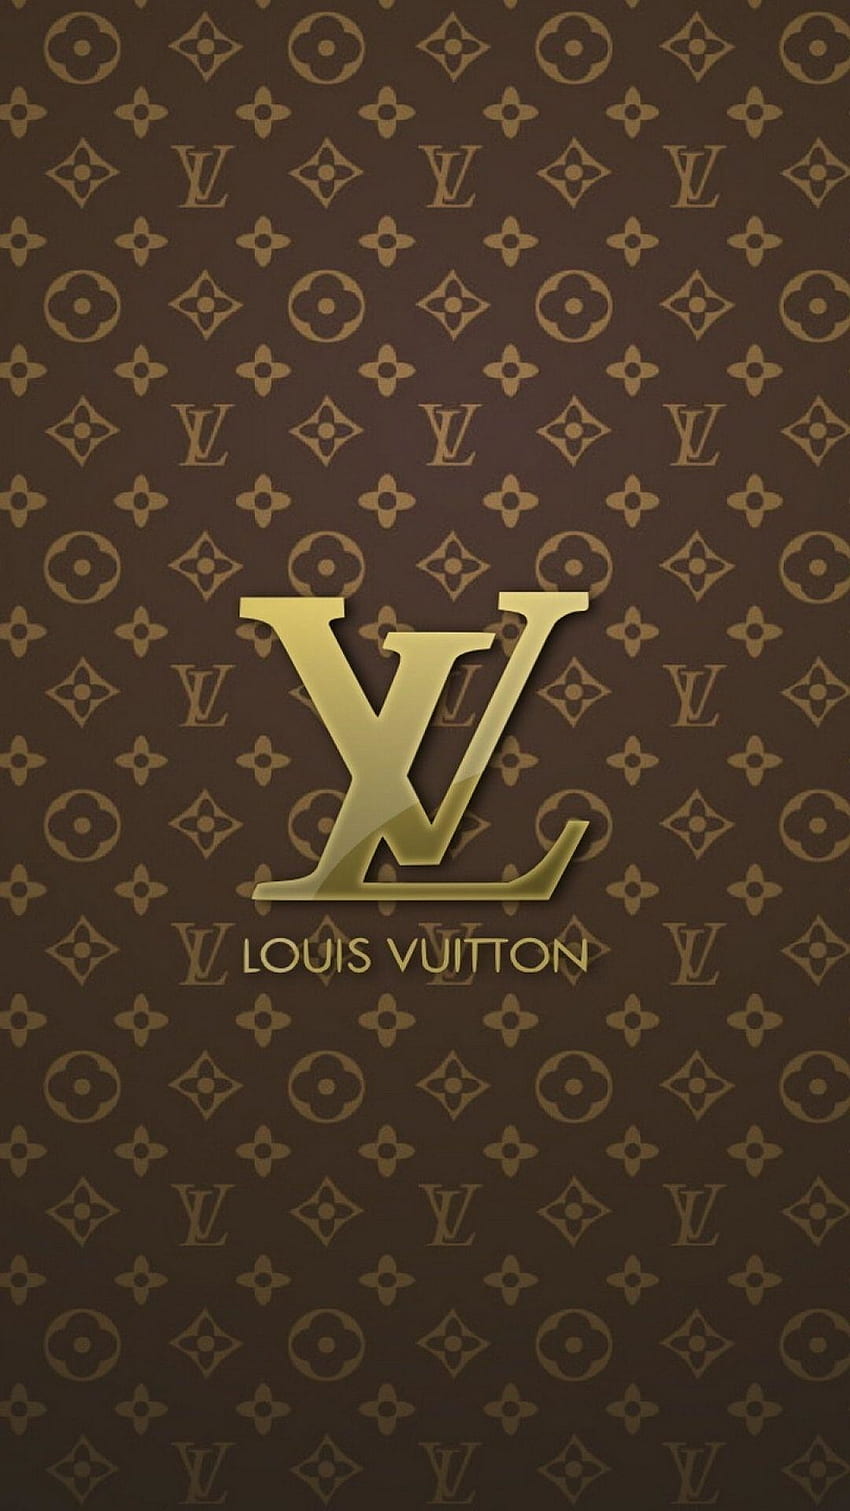 I just make a Supreme/Louis Vuitton wallpaper, does it looks good ? : r/ supremeclothing